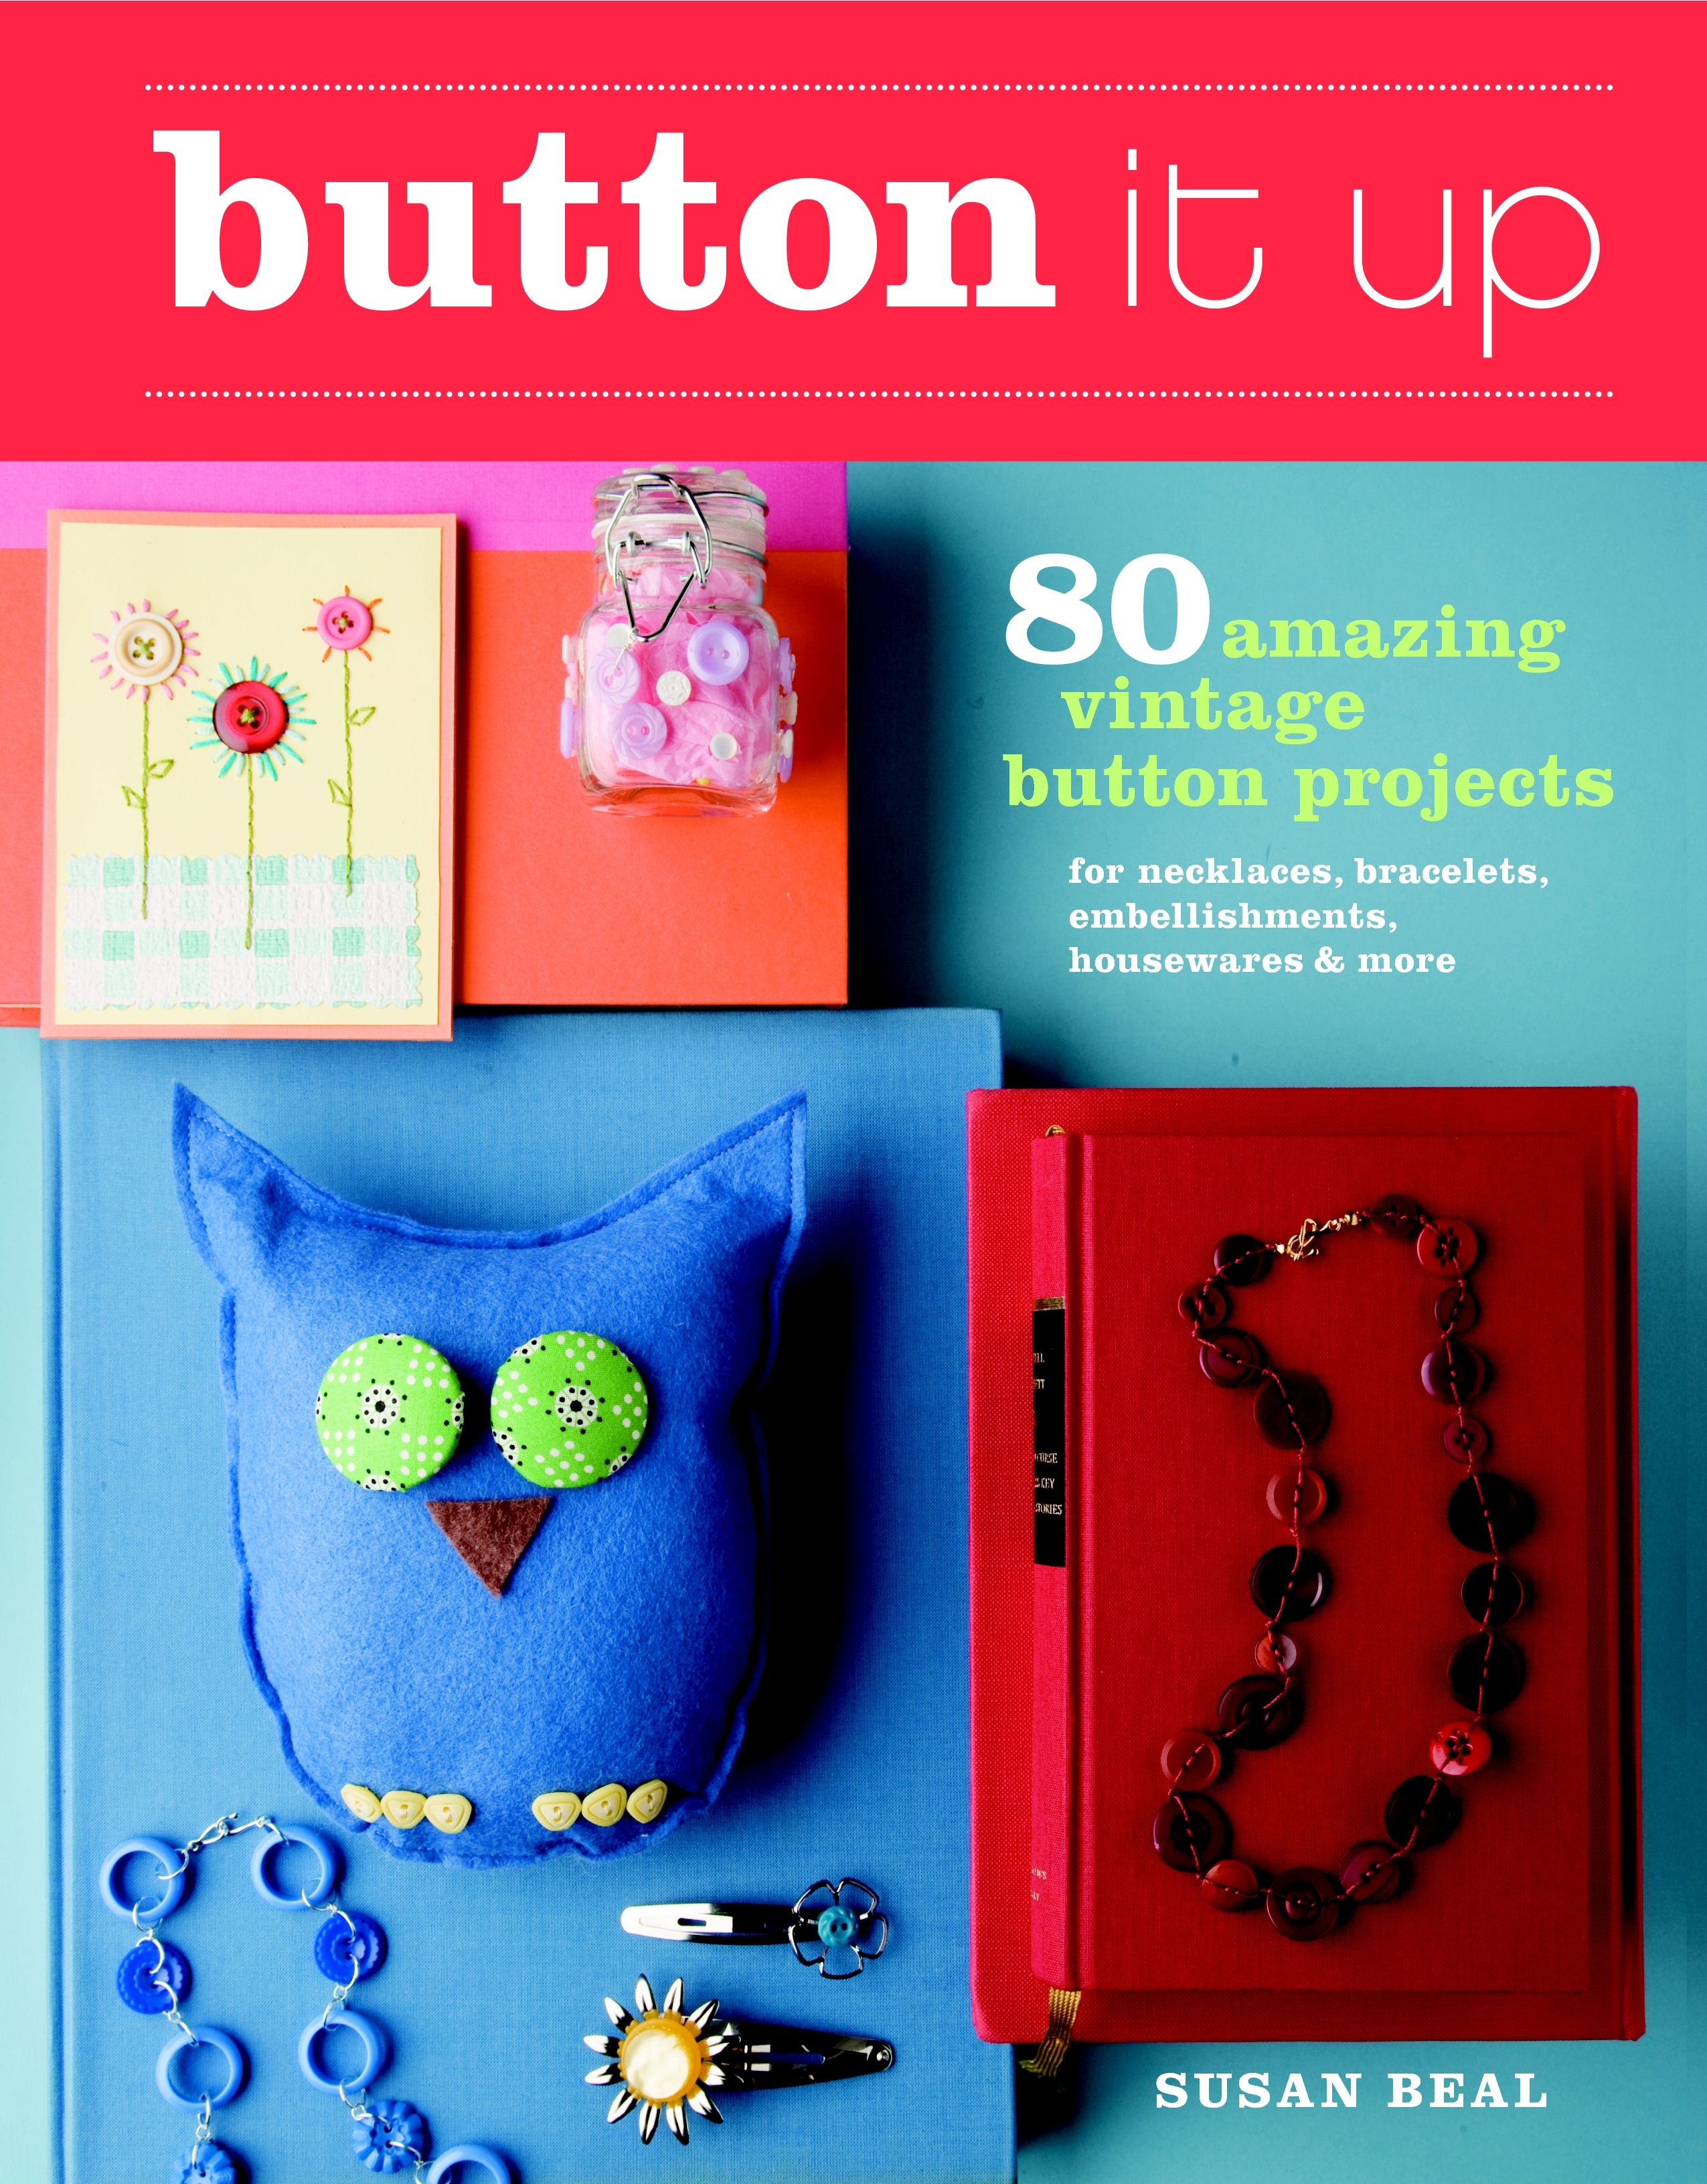 Button It Up: 80 Amazing Vintage Button Projects for Necklaces, Bracelets, Embellishments, Housewares, and More (Paperback) - image 1 of 1